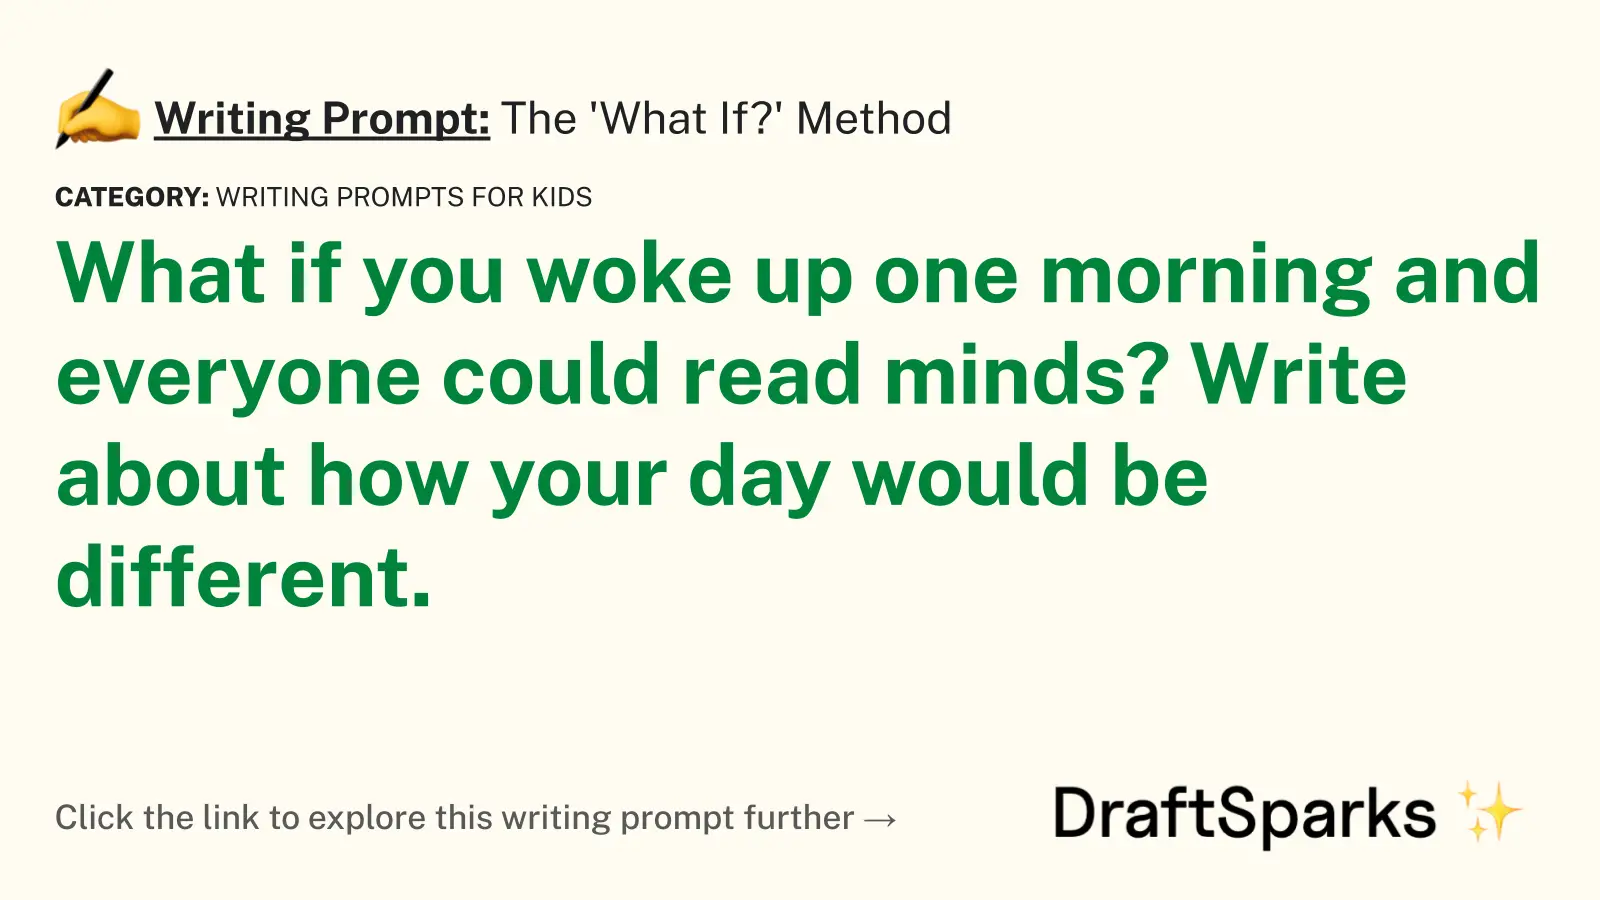 The ‘What If?’ Method